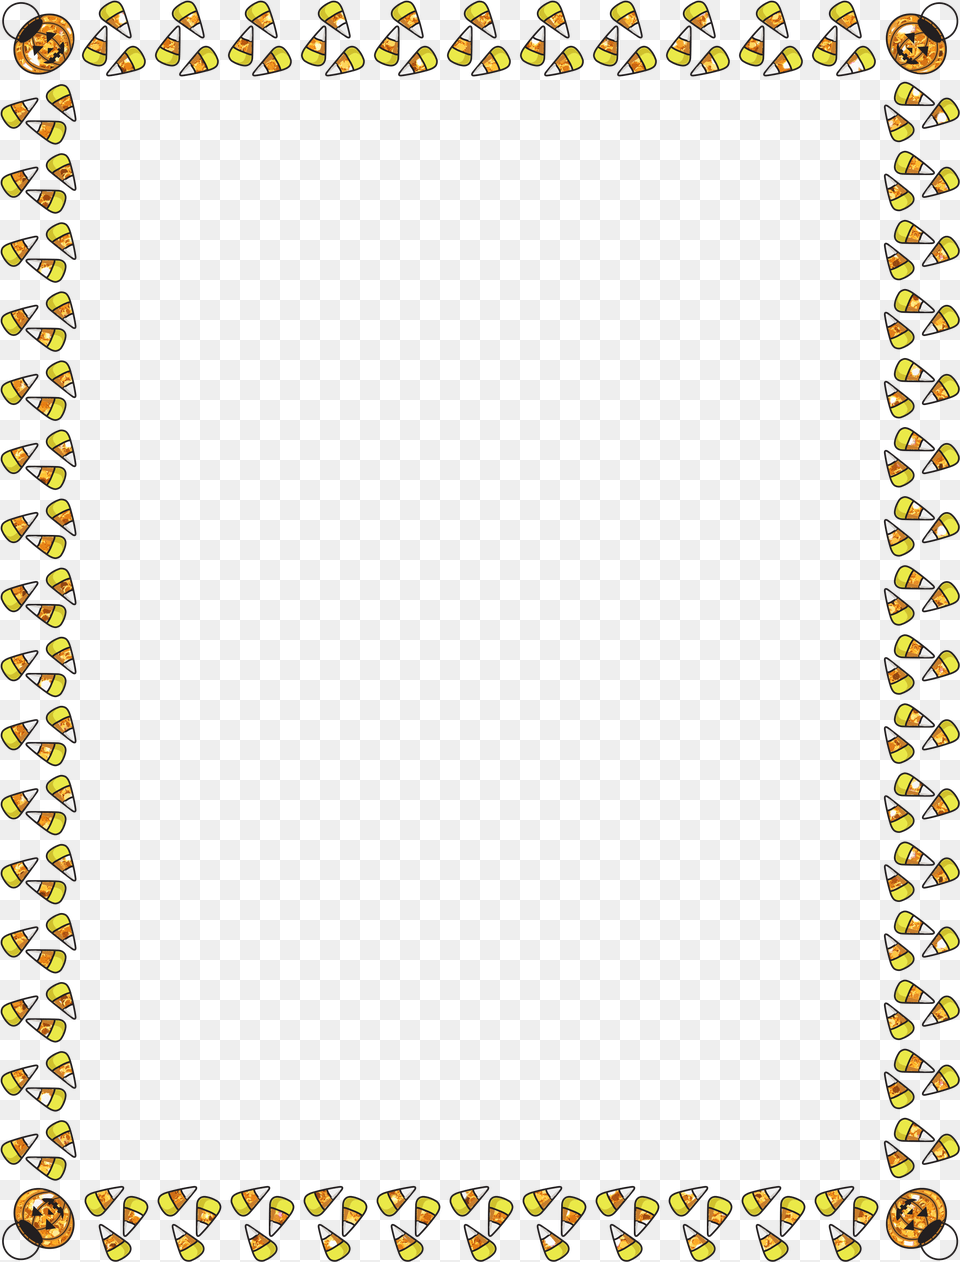 Clipart Frames Halloween Candy Corn Graphing, Home Decor Free Transparent Png